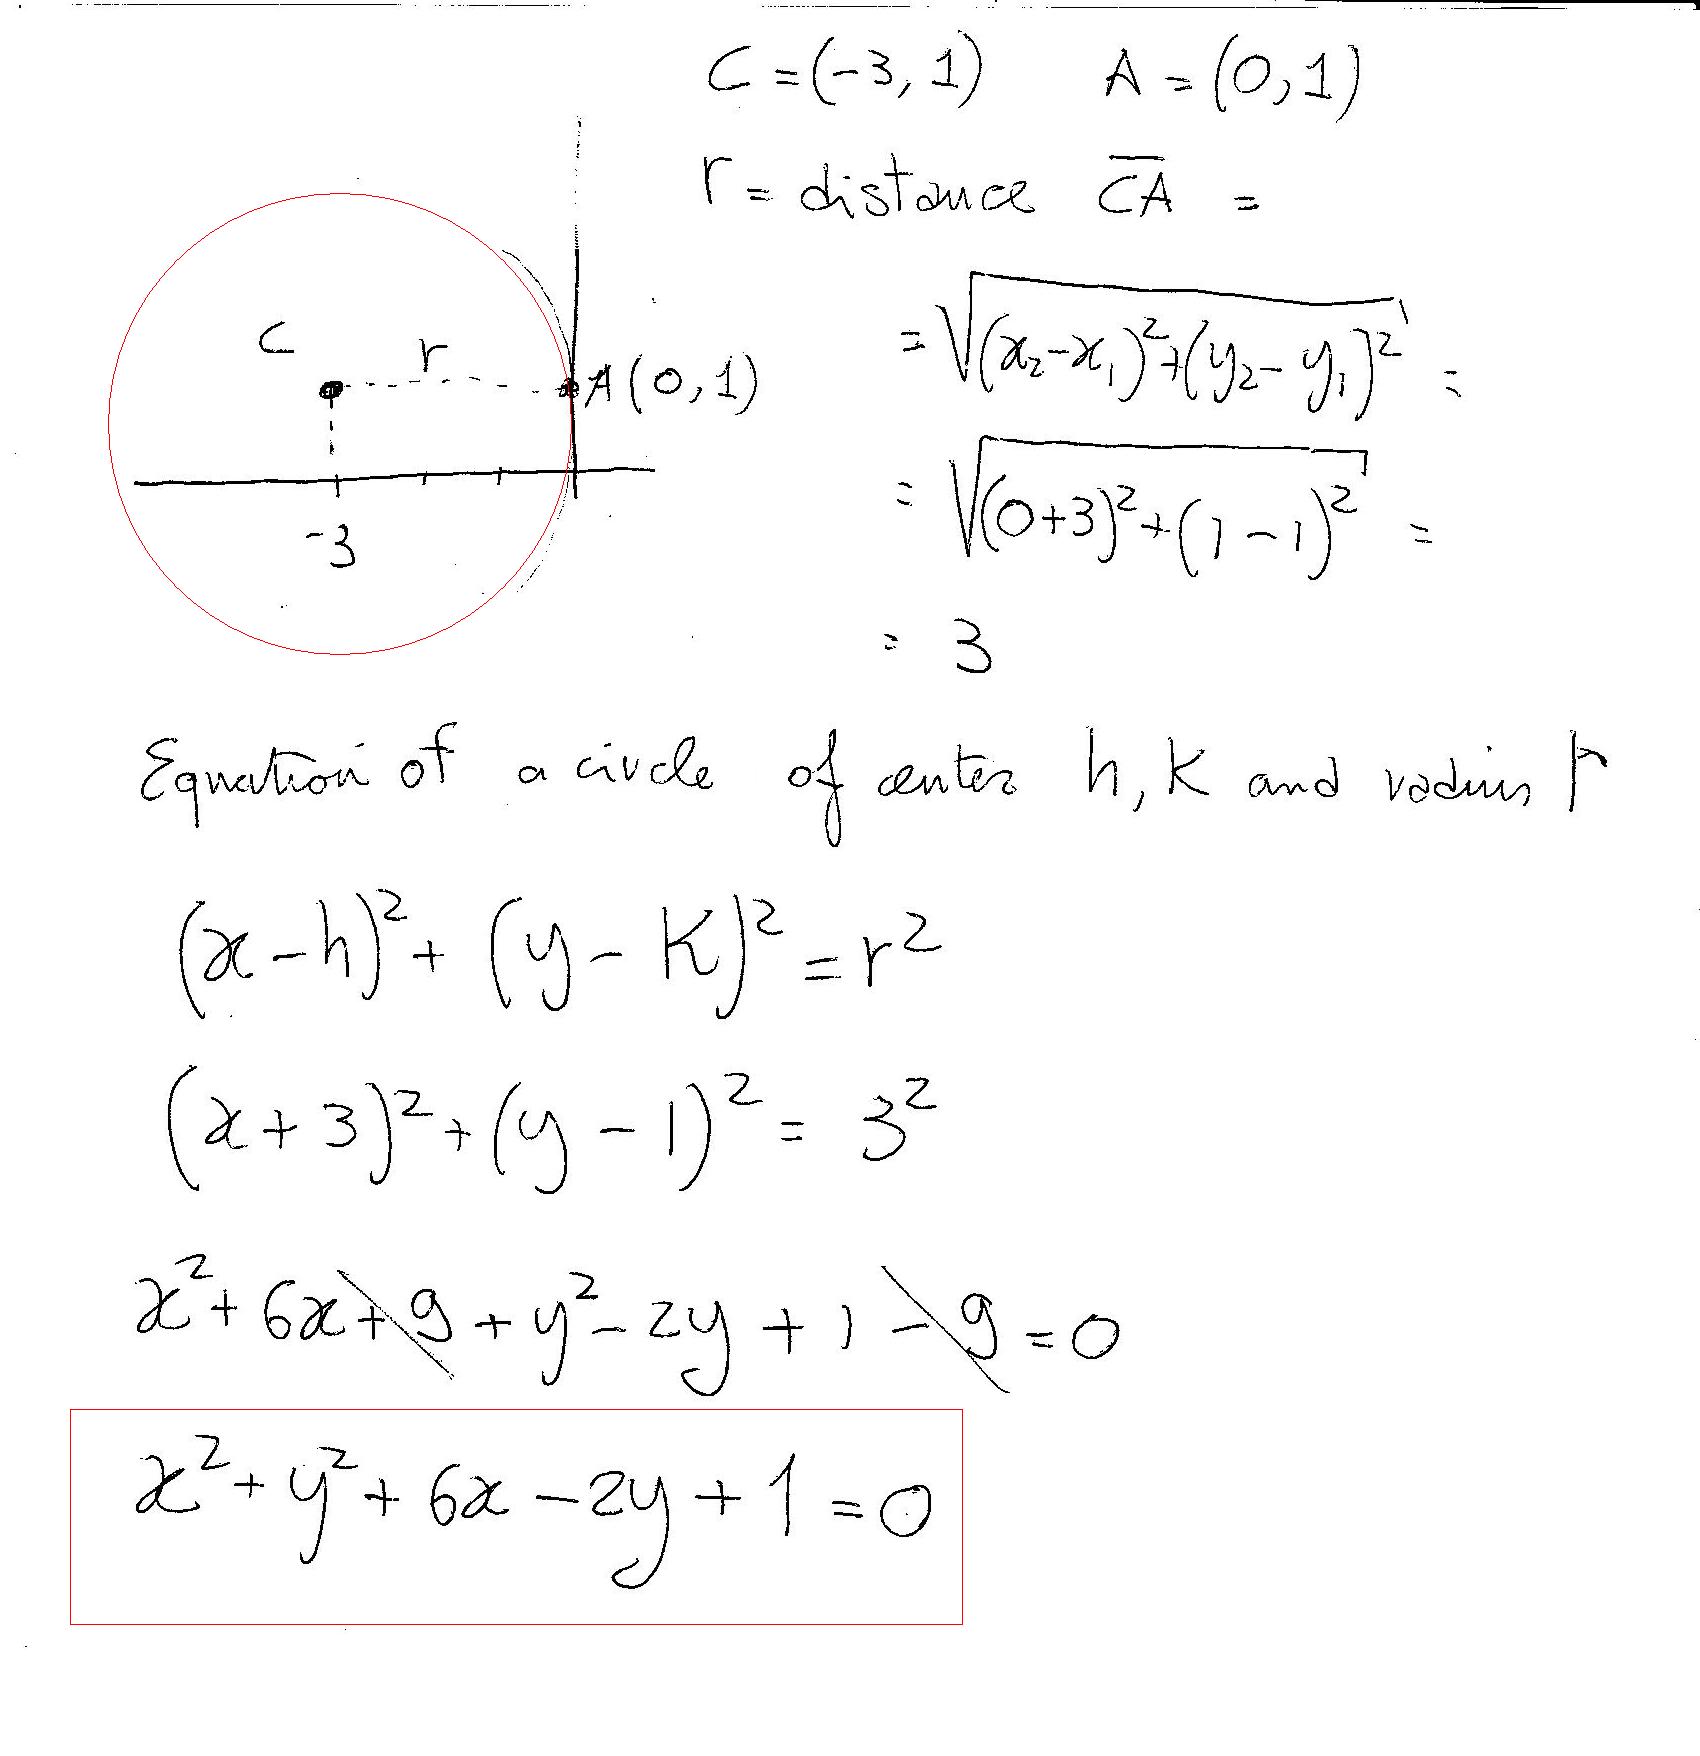 How do you write an equation of a circle given center at the point